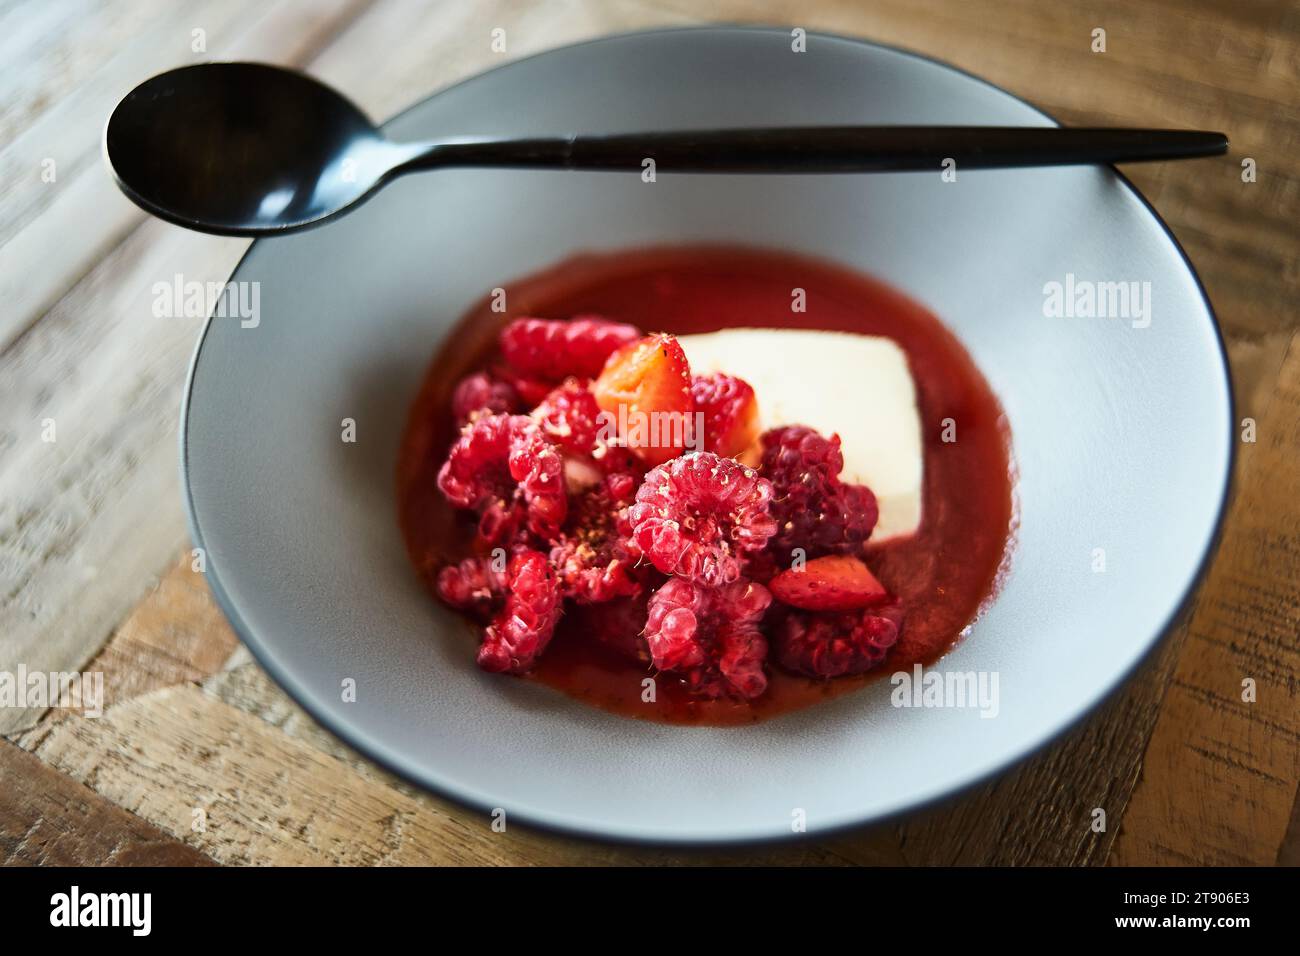 Gourmet dessert of strawberries and raspberries with fresh cream in a dish with spoon on a wooden table Stock Photo